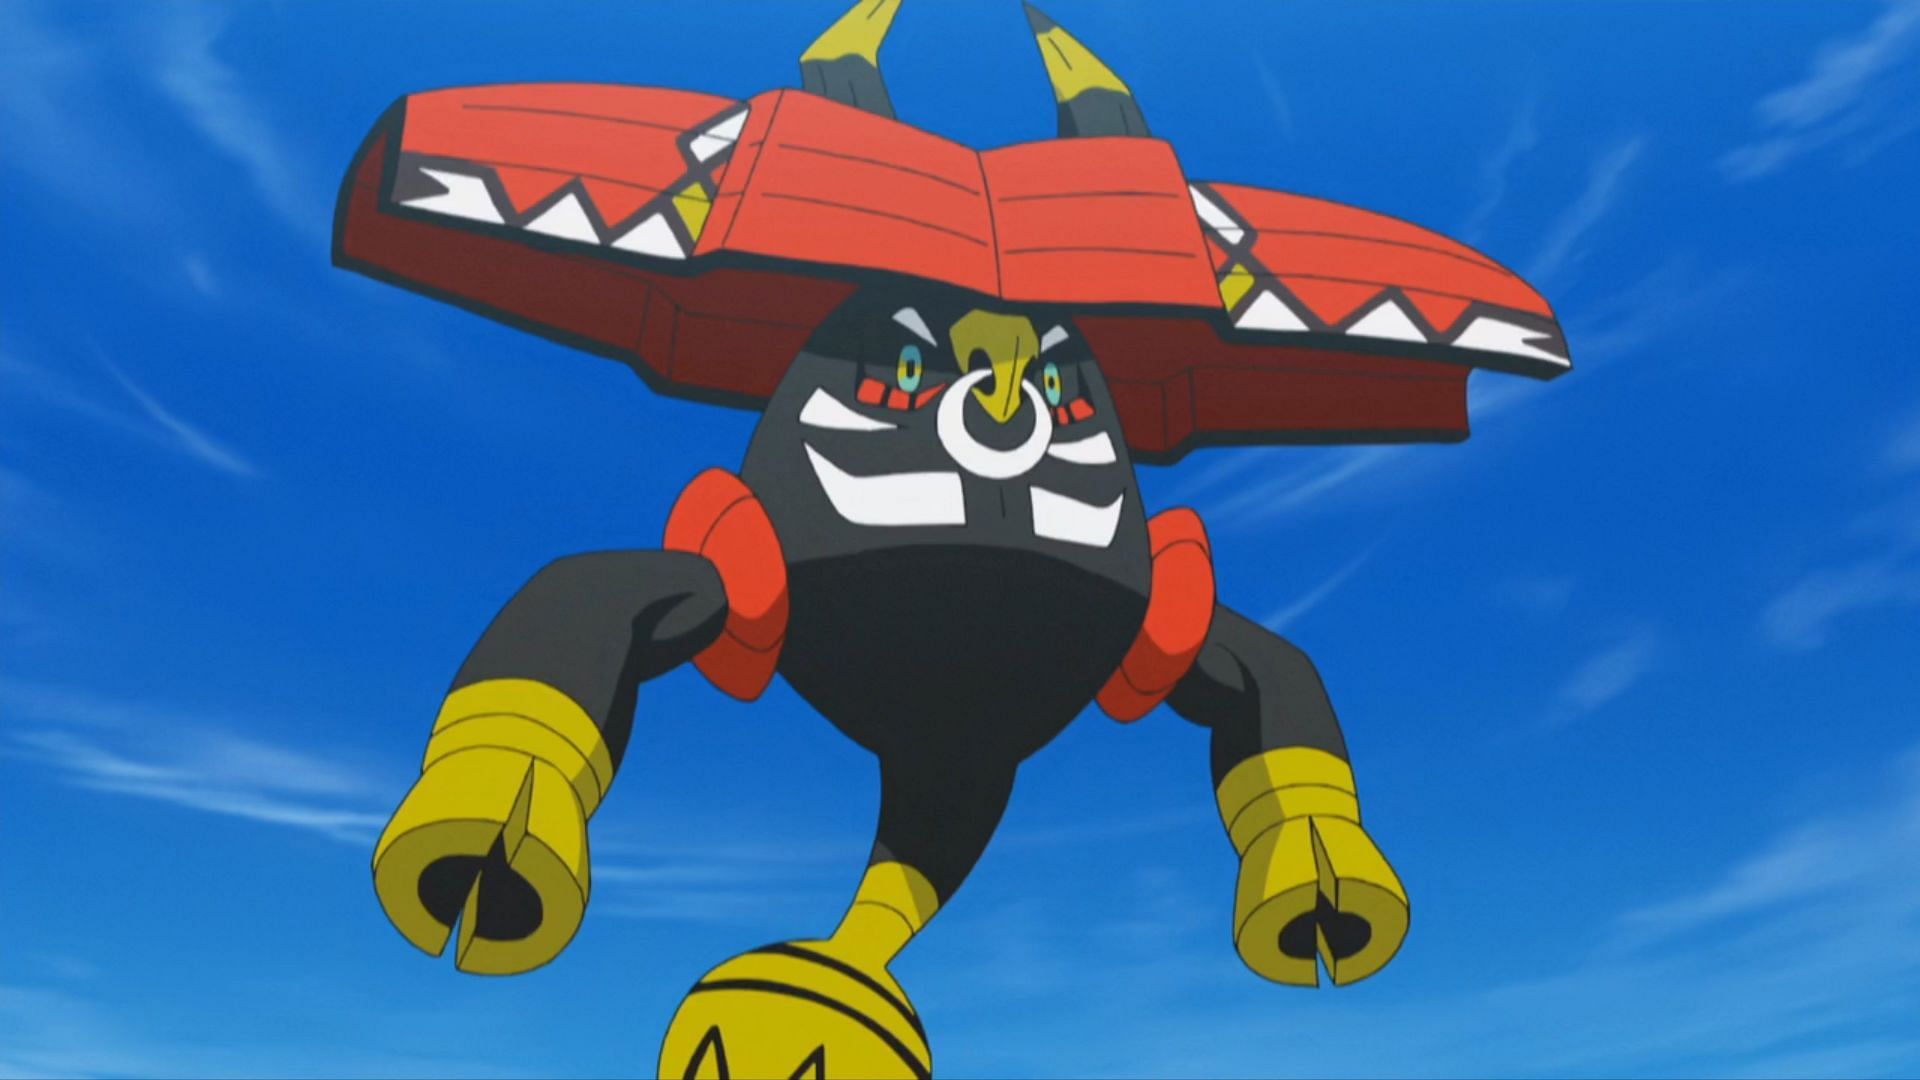 Tapu Bulu will make its debut during this event (Image via The Pokemon Company)